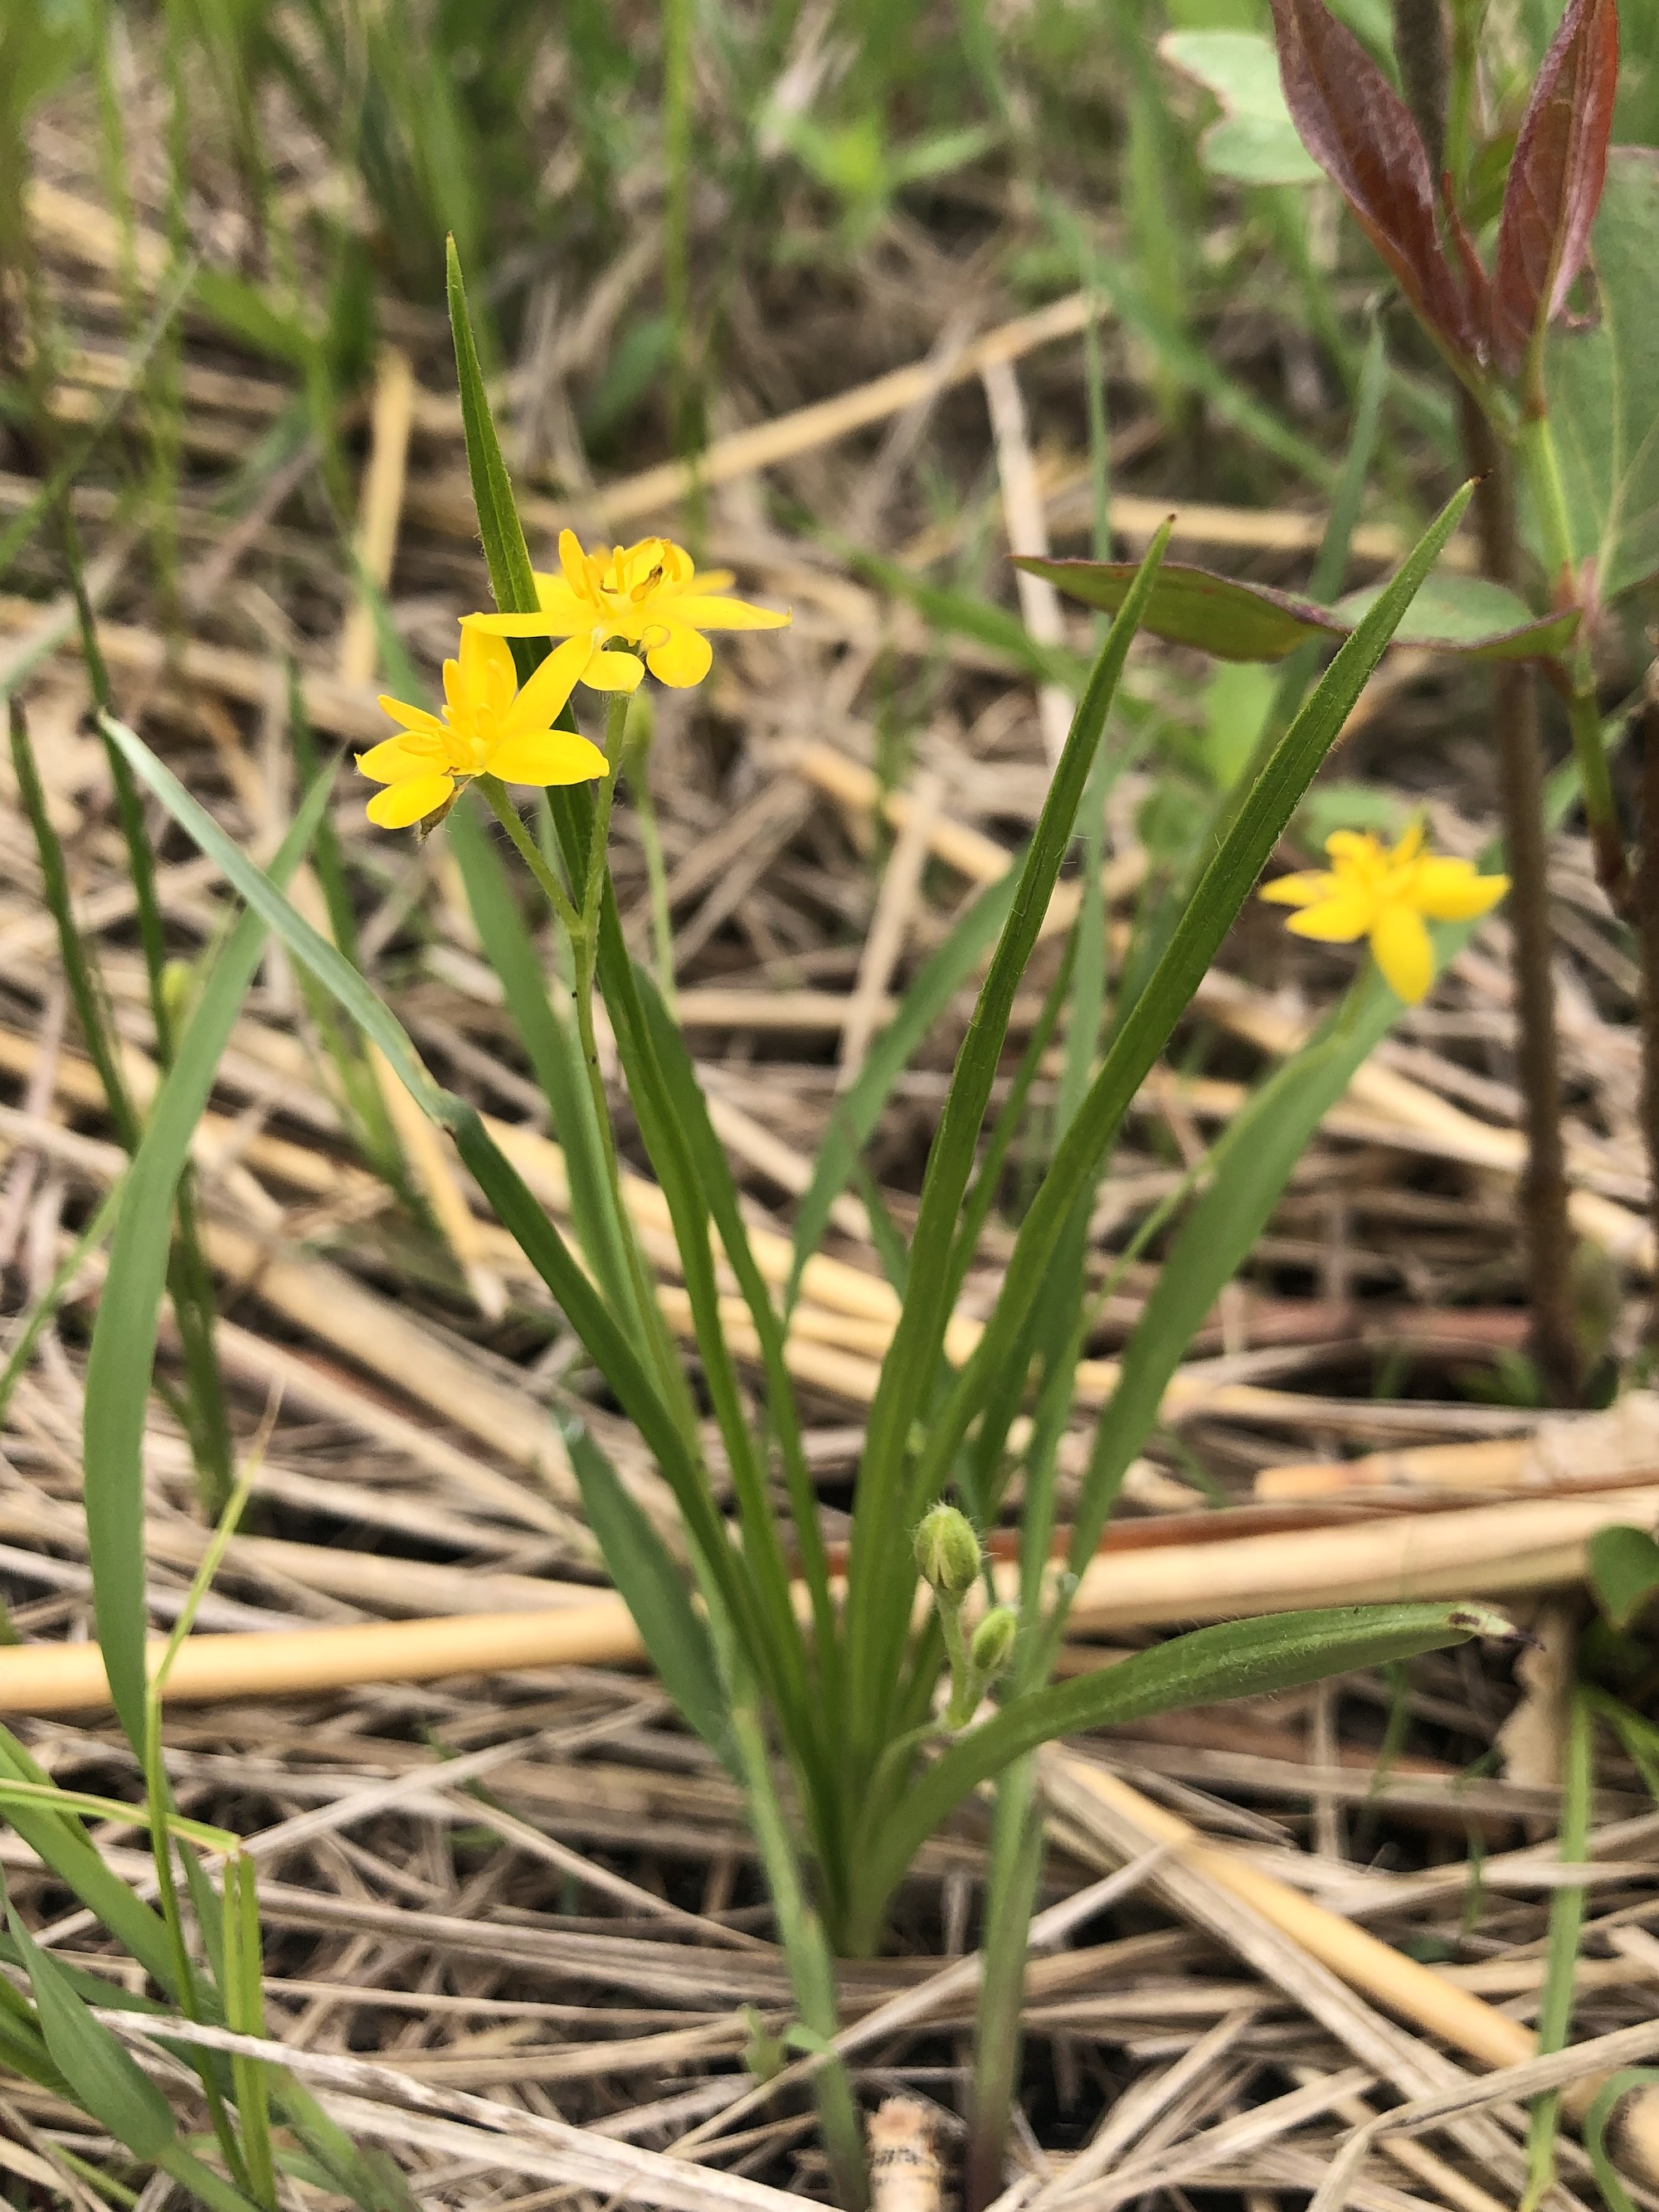 Yellow Star Grass in the Curtis Prairie in the University of Wisconsin-Madison Arboretum in Madison, Wisconsin on May 21, 2022.